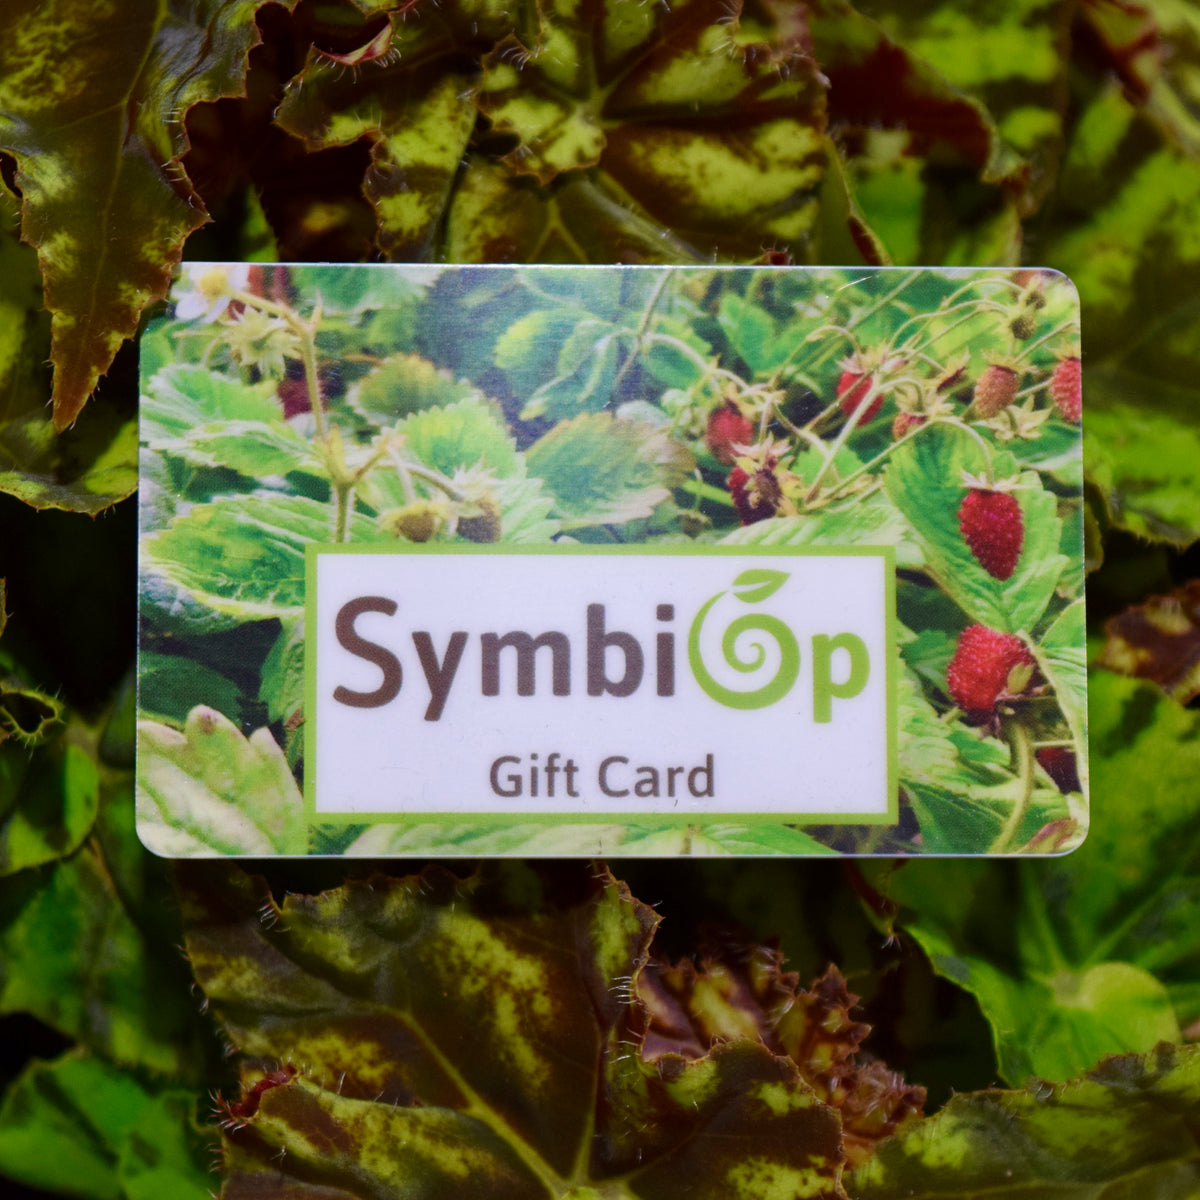 A gift card with SymbiOp's name and a background of a fruit bearing plant. It is sitting on top of dark green leaves.